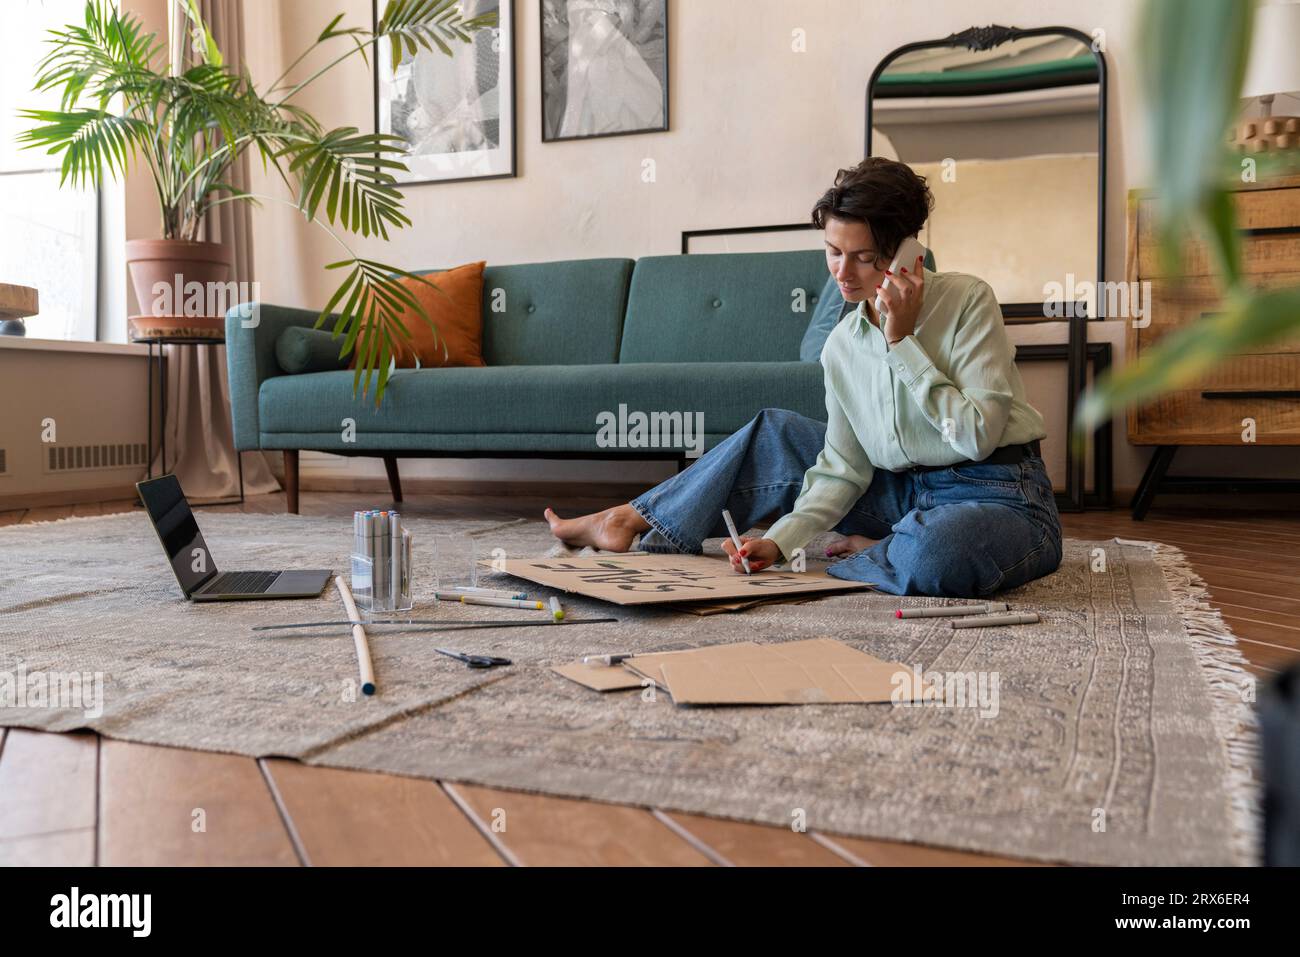 Activist making environment placard and talking on smart phone in living room at home Stock Photo